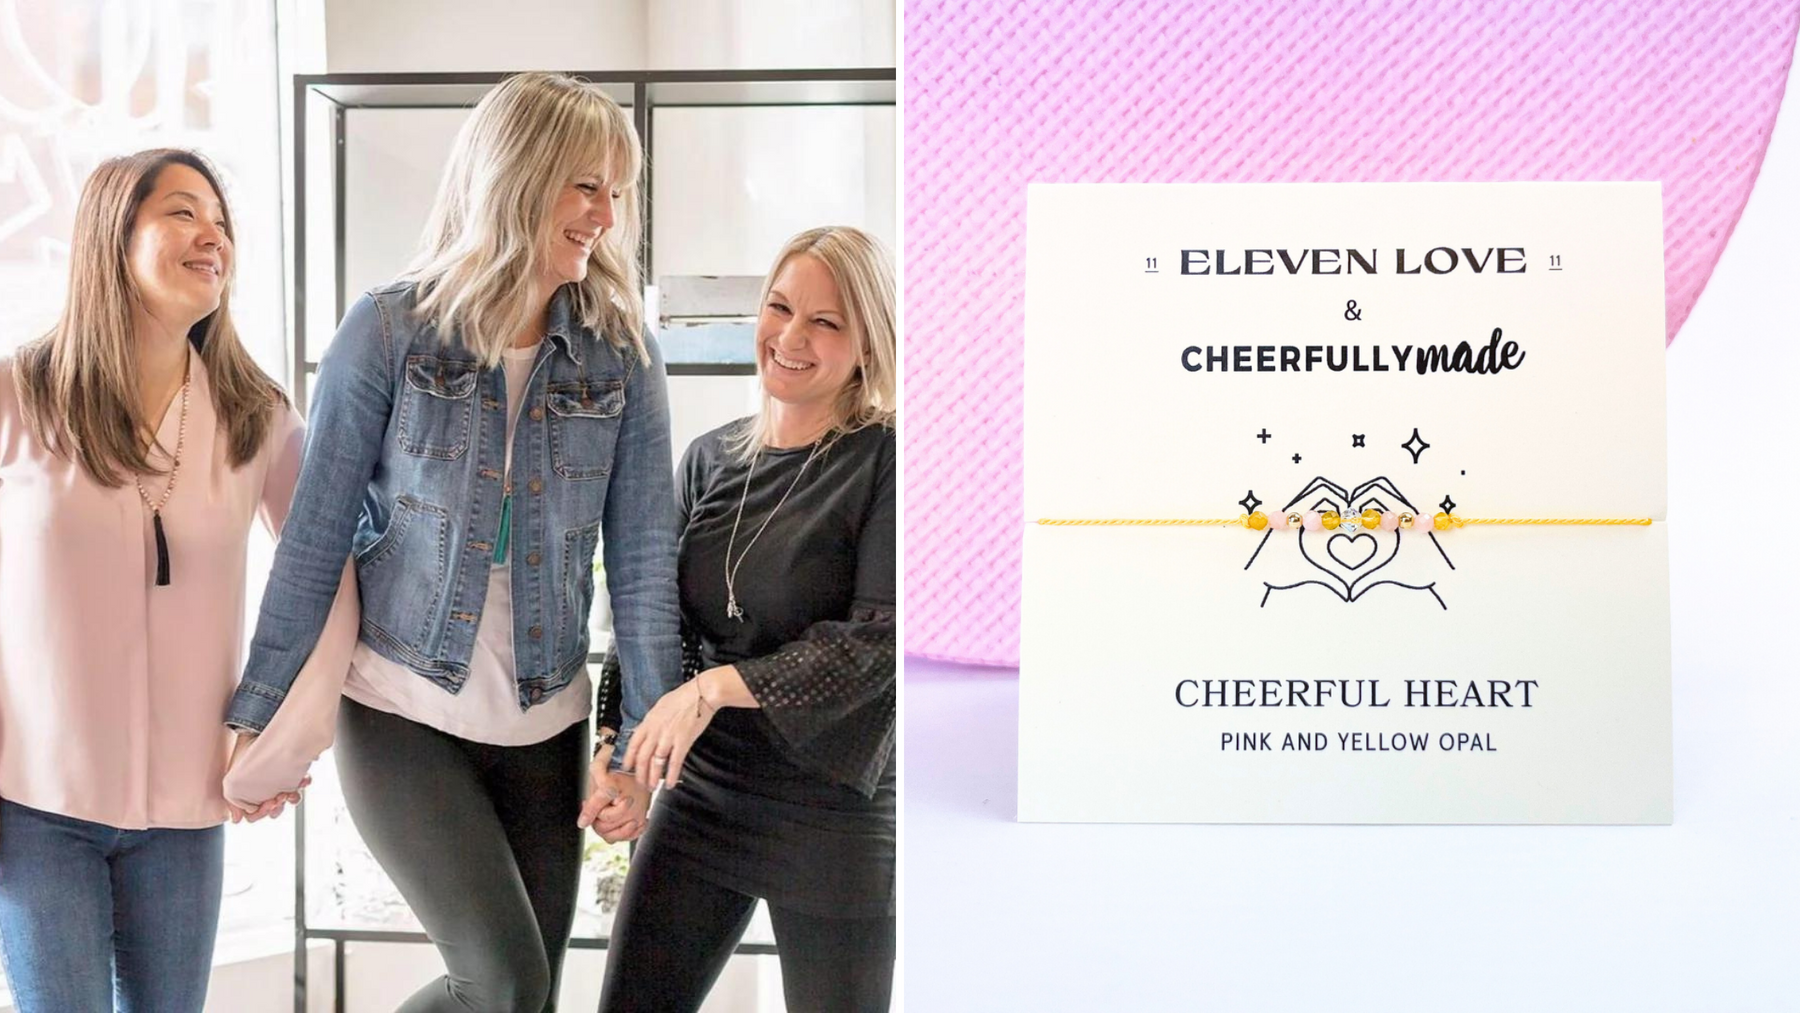 Eleven Love x Cheerfully Made Birthday Collab